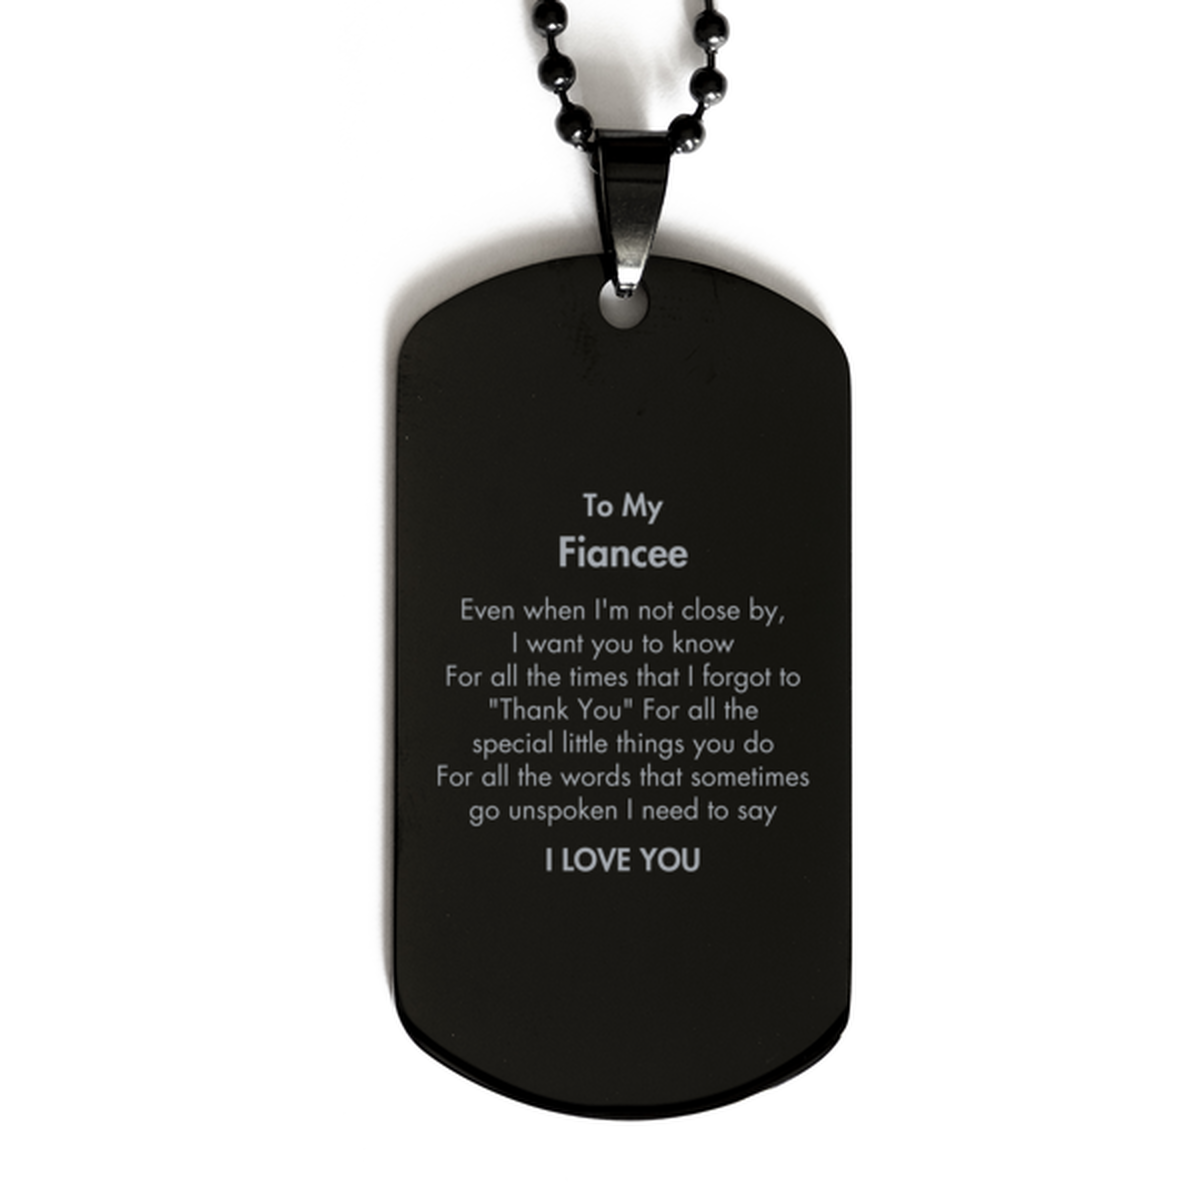 Thank You Gifts for Fiancee, Keepsake Black Dog Tag Gifts for Fiancee Birthday Mother's day Father's Day Fiancee For all the words That sometimes go unspoken I need to say I LOVE YOU